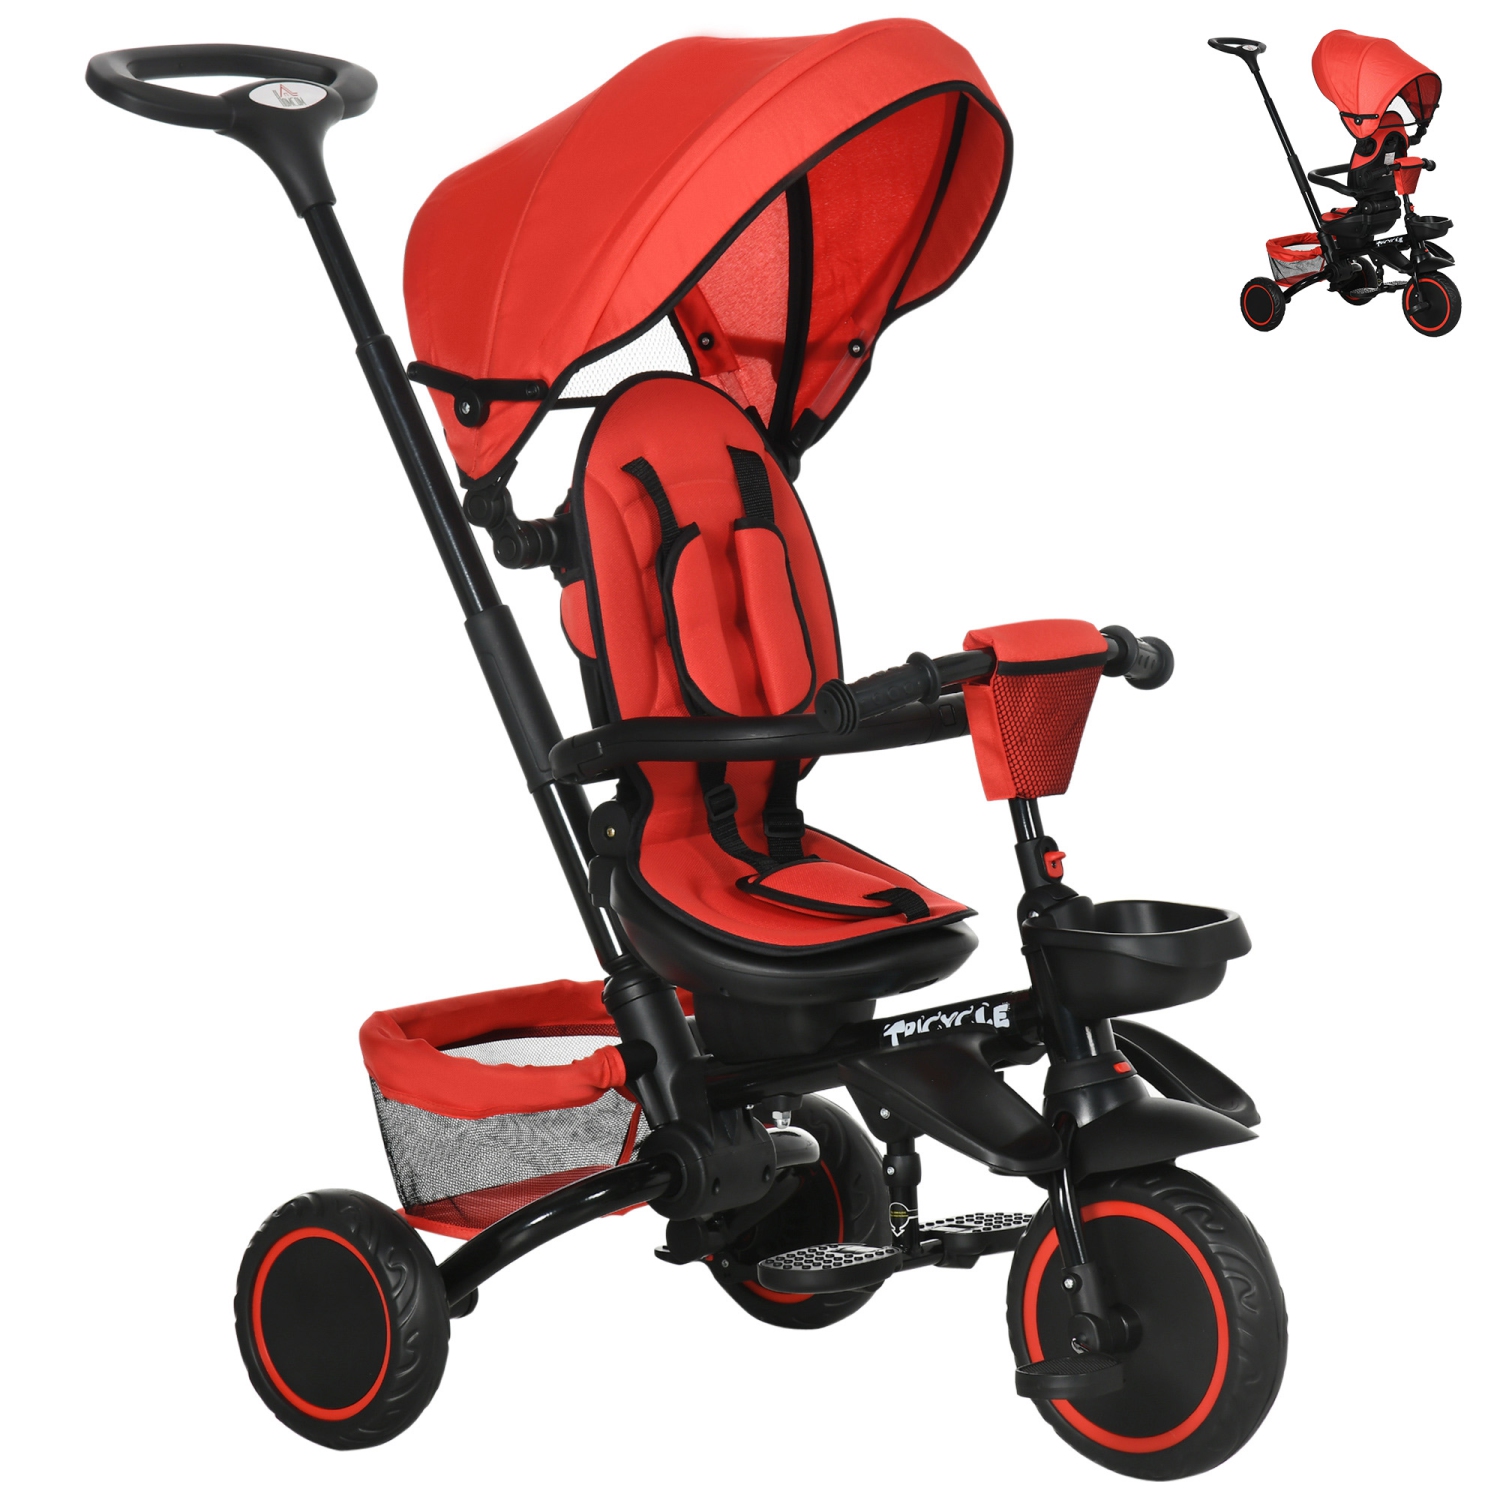 Aosom 6-in-1 Toddler Tricycle for 12-50 Months, Foldable Kids Trike with Adjustable Seat and Push Handle, Safety Harness, Removable Canopy, Footrest, Red